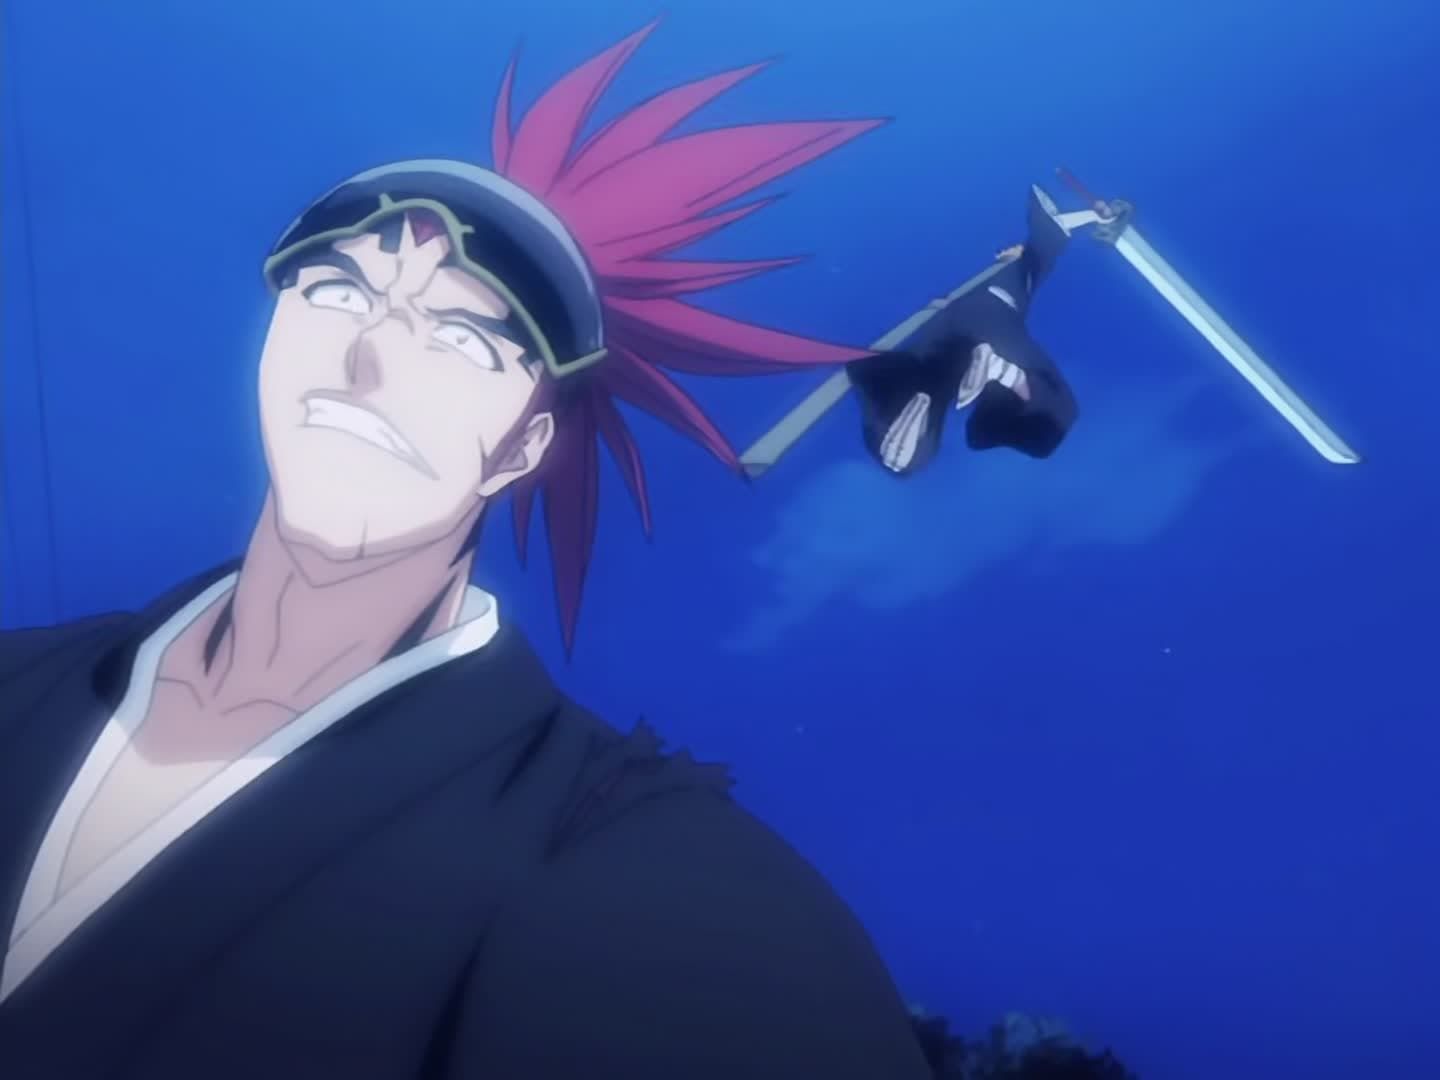 Where to watch Bleach TV series streaming online?